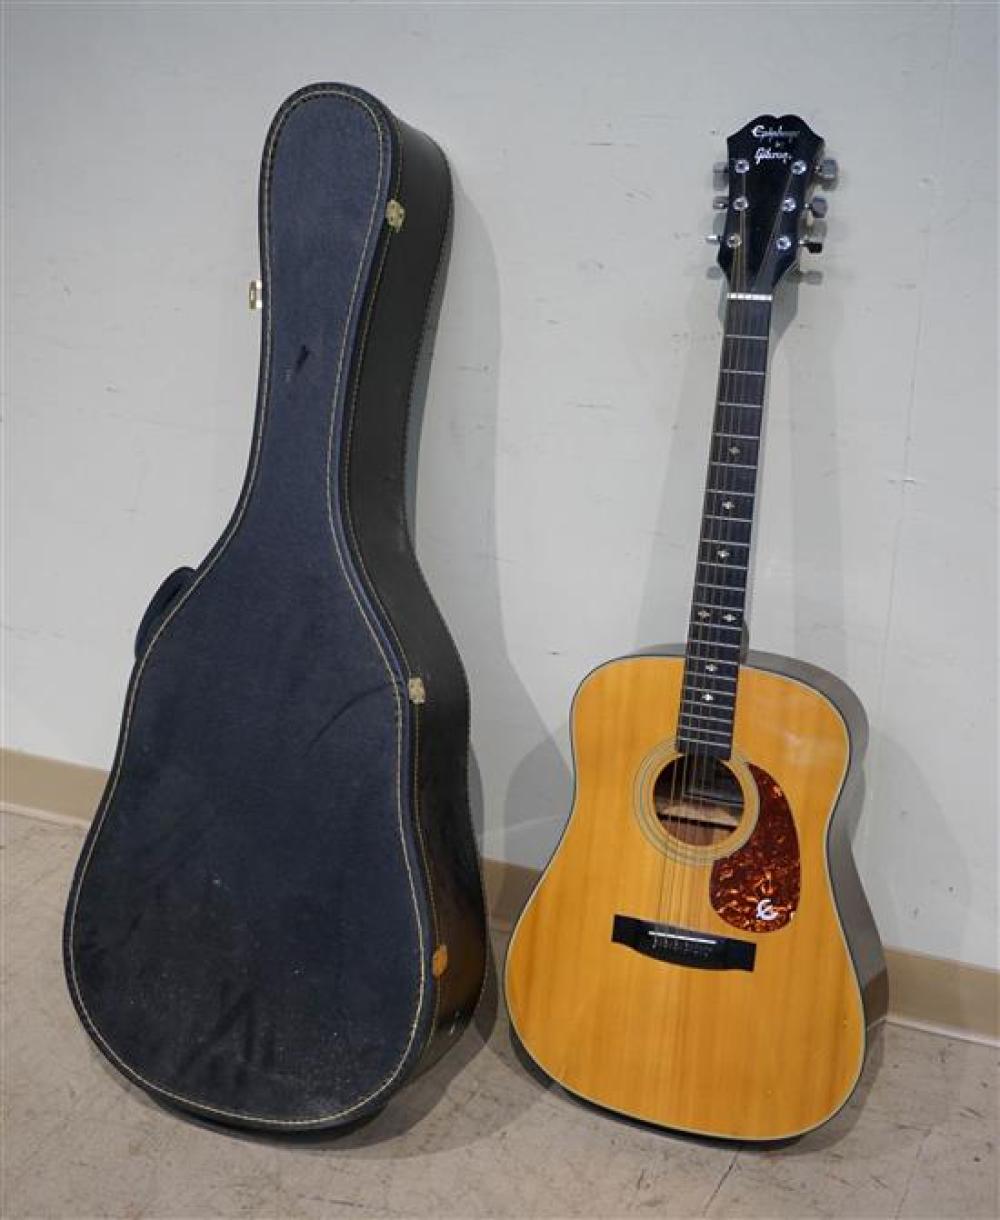 GIBSON EPIPHONE ACOUSTIC GUITAR 31f8c0